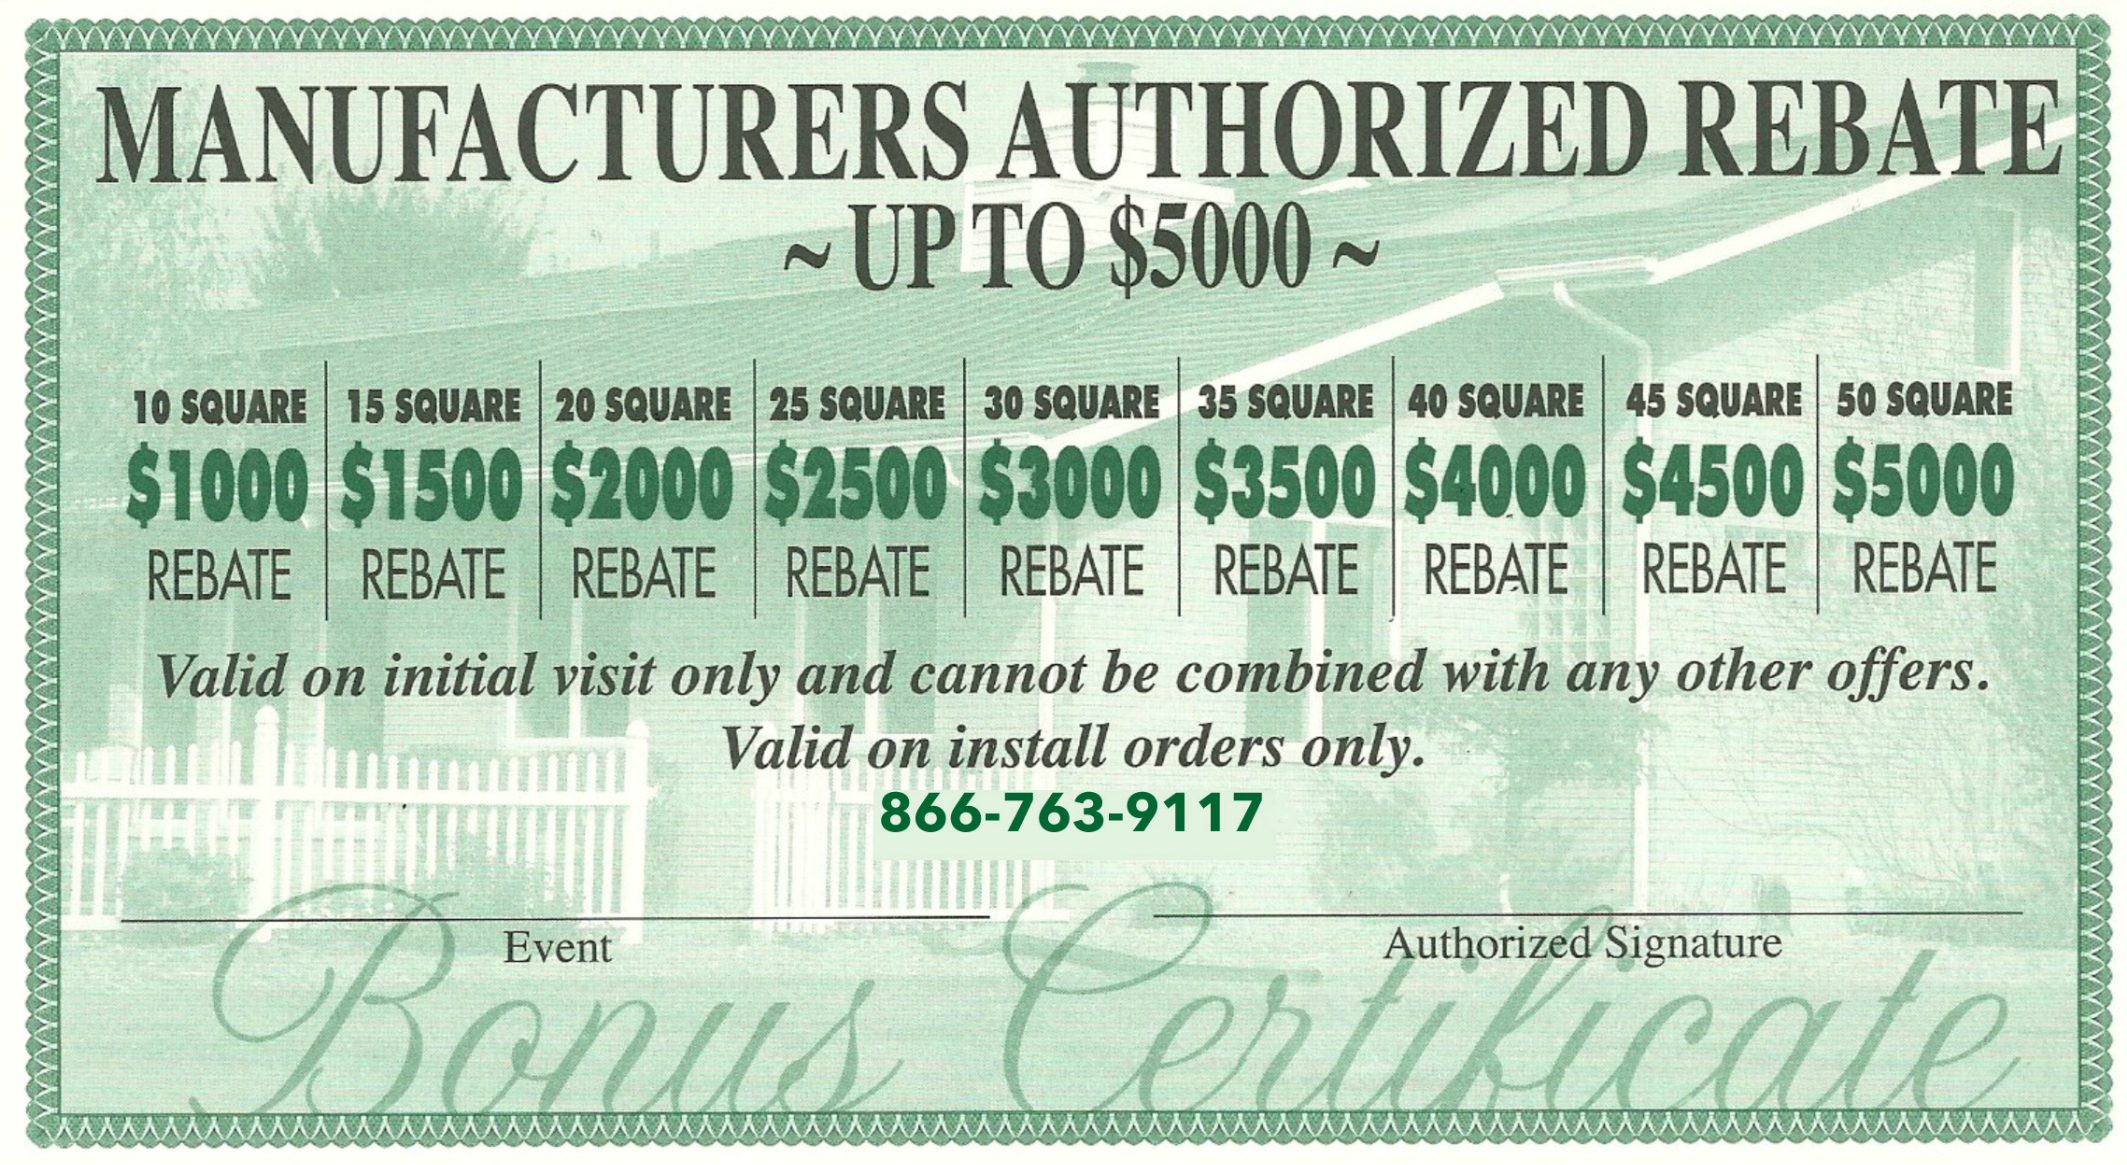 Leading Metal Roof Company Announces 5000 Manufacturer s Authorized Roofing Rebate